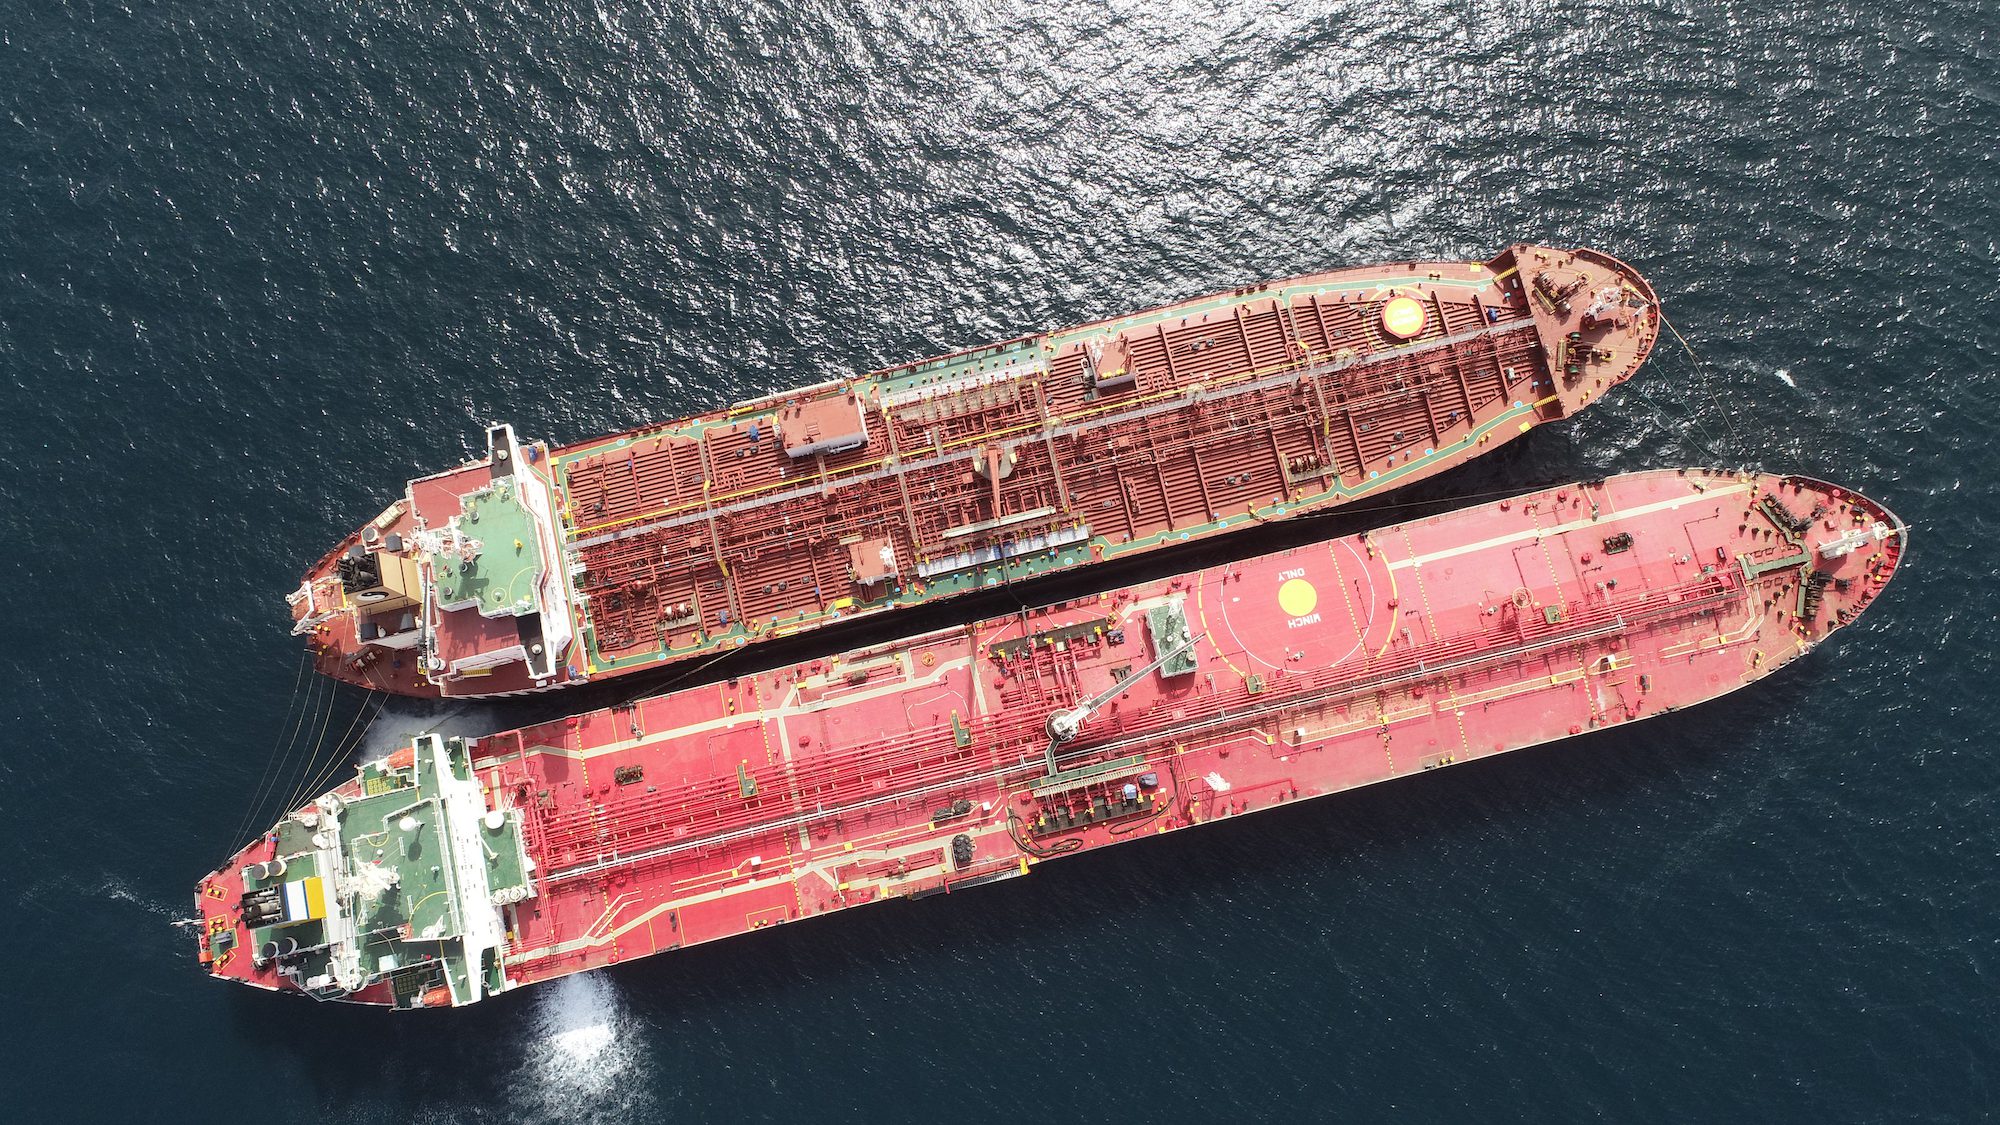 Stock photo of a ship-to-ship transfer between two tankers from above